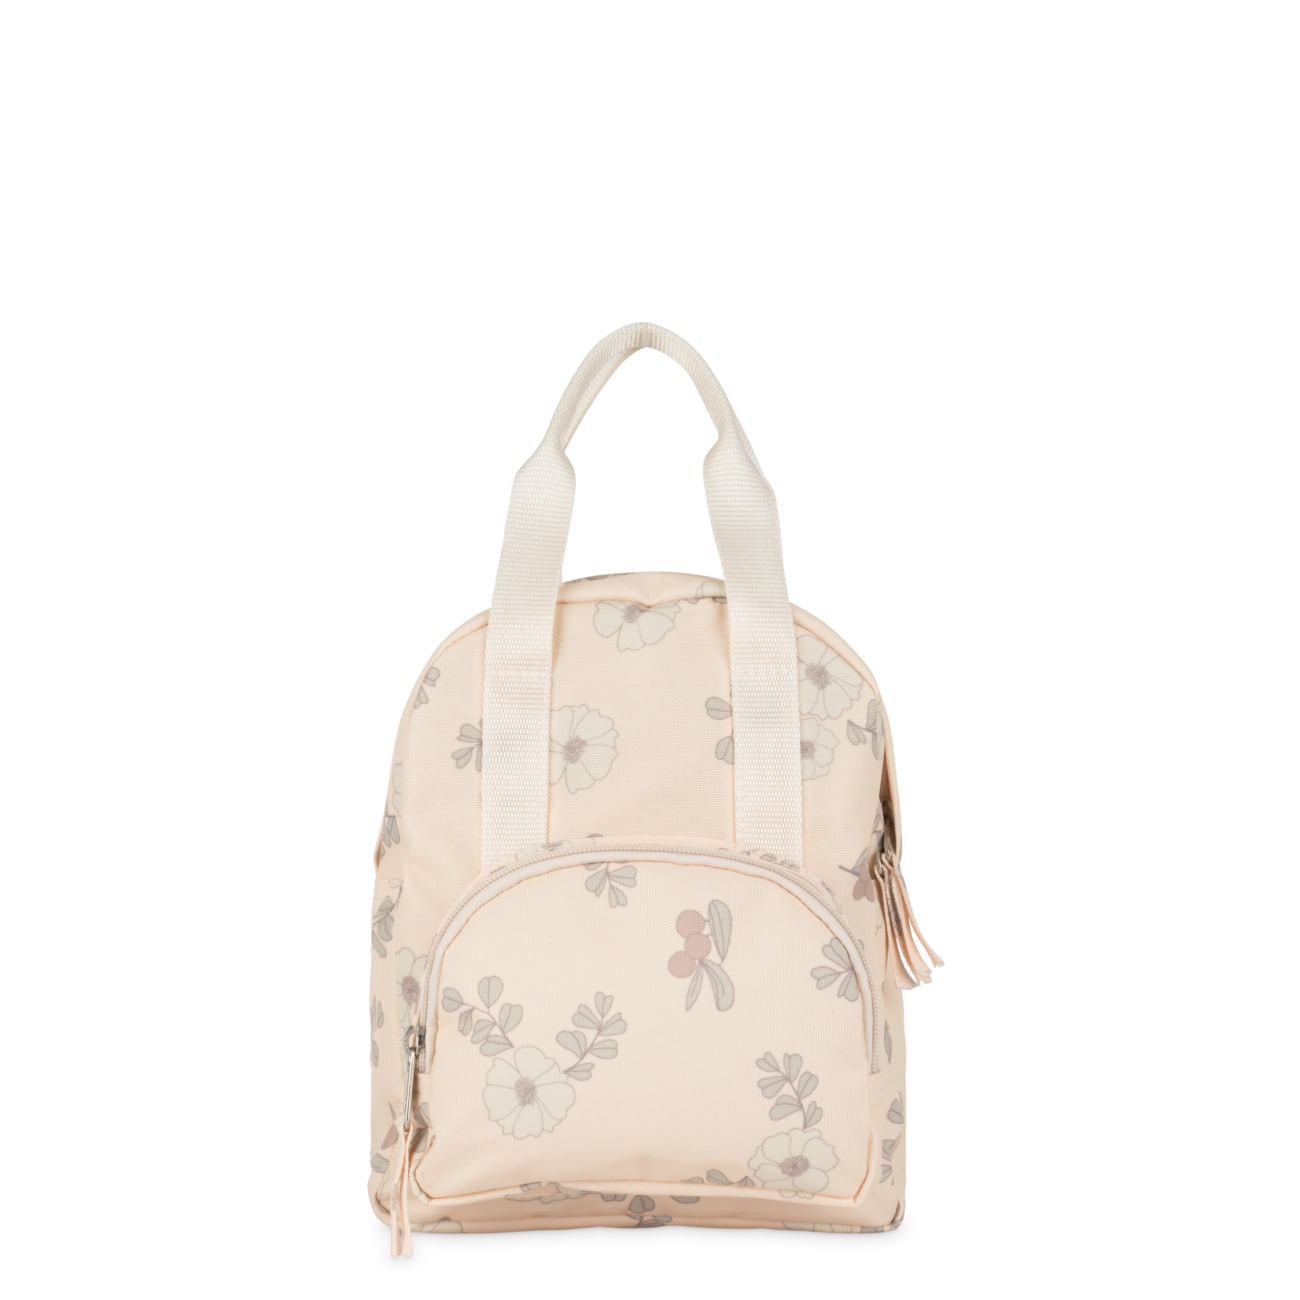 Backpack - Flowers and berries